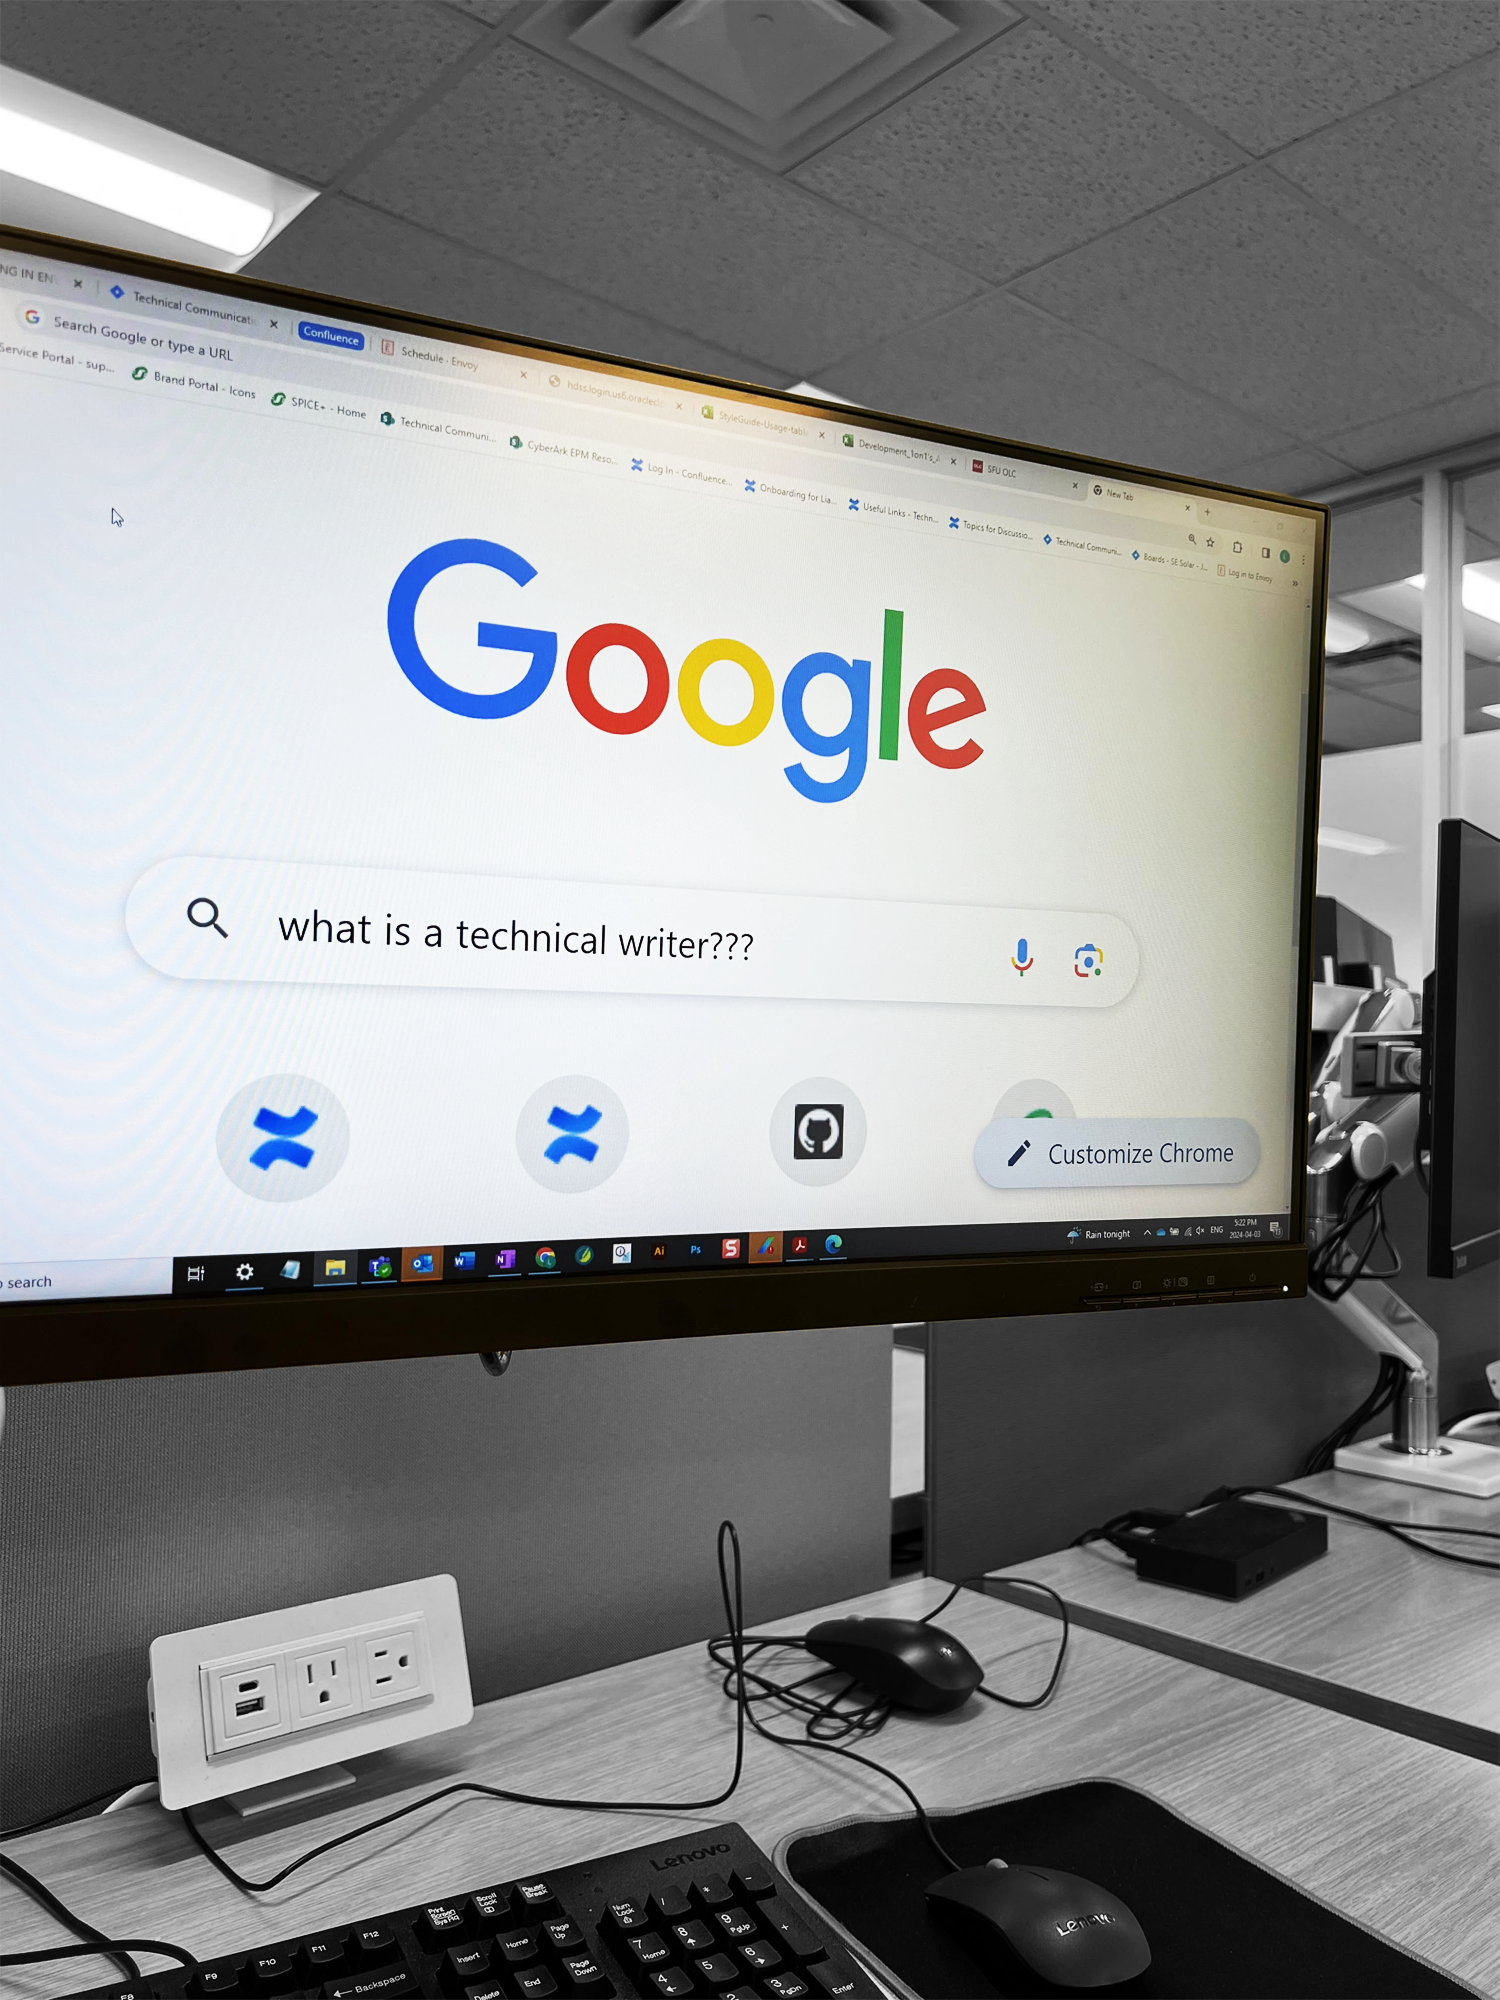 Image of computer monitor displaying Google. "What is a technical writer???" is written into Google search bar. 